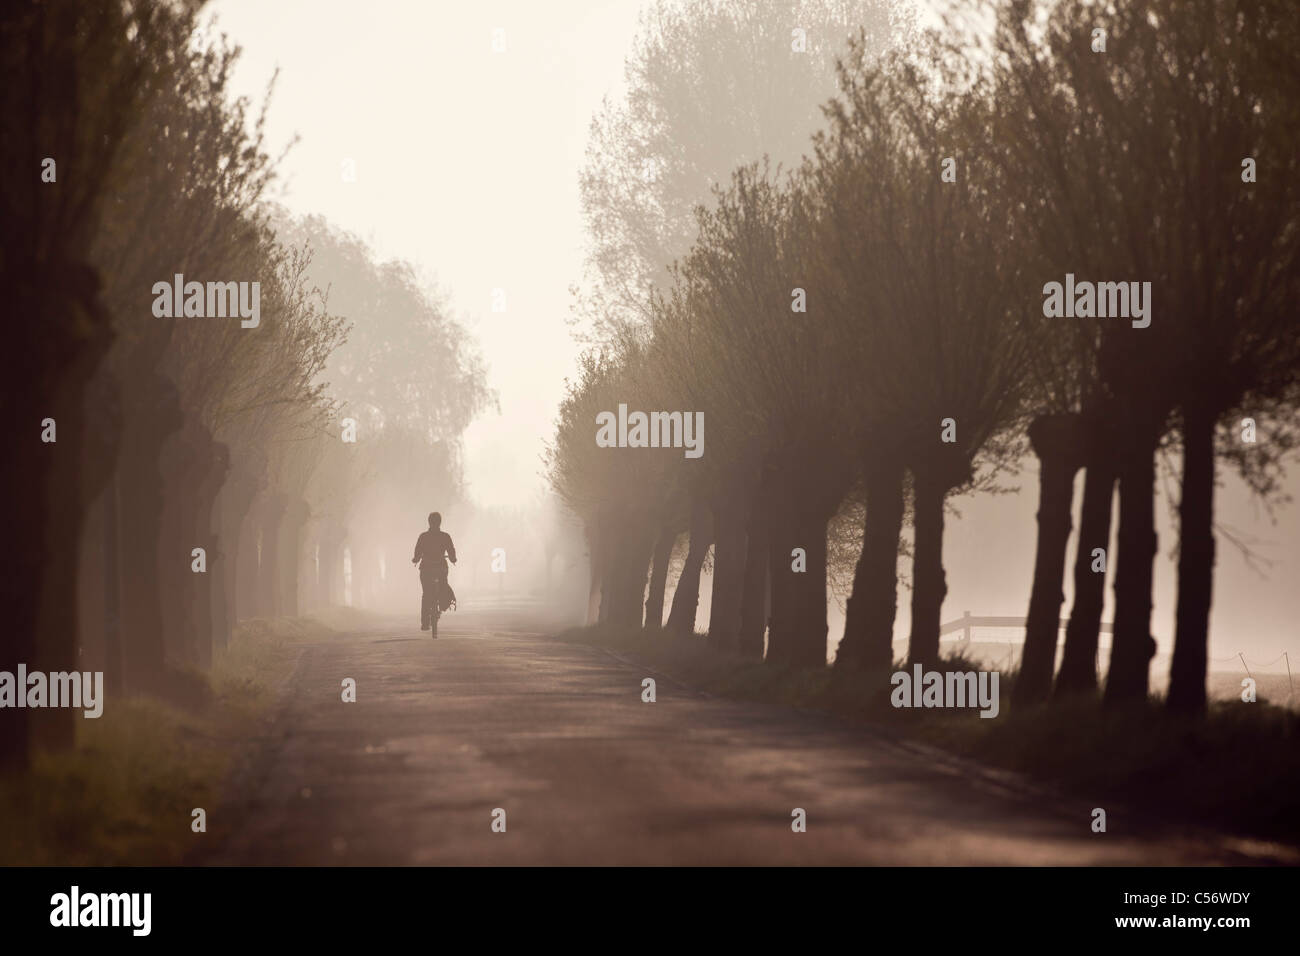 The Netherlands, Niedorp, Woman cycling on tree lane in morning mist. Stock Photo